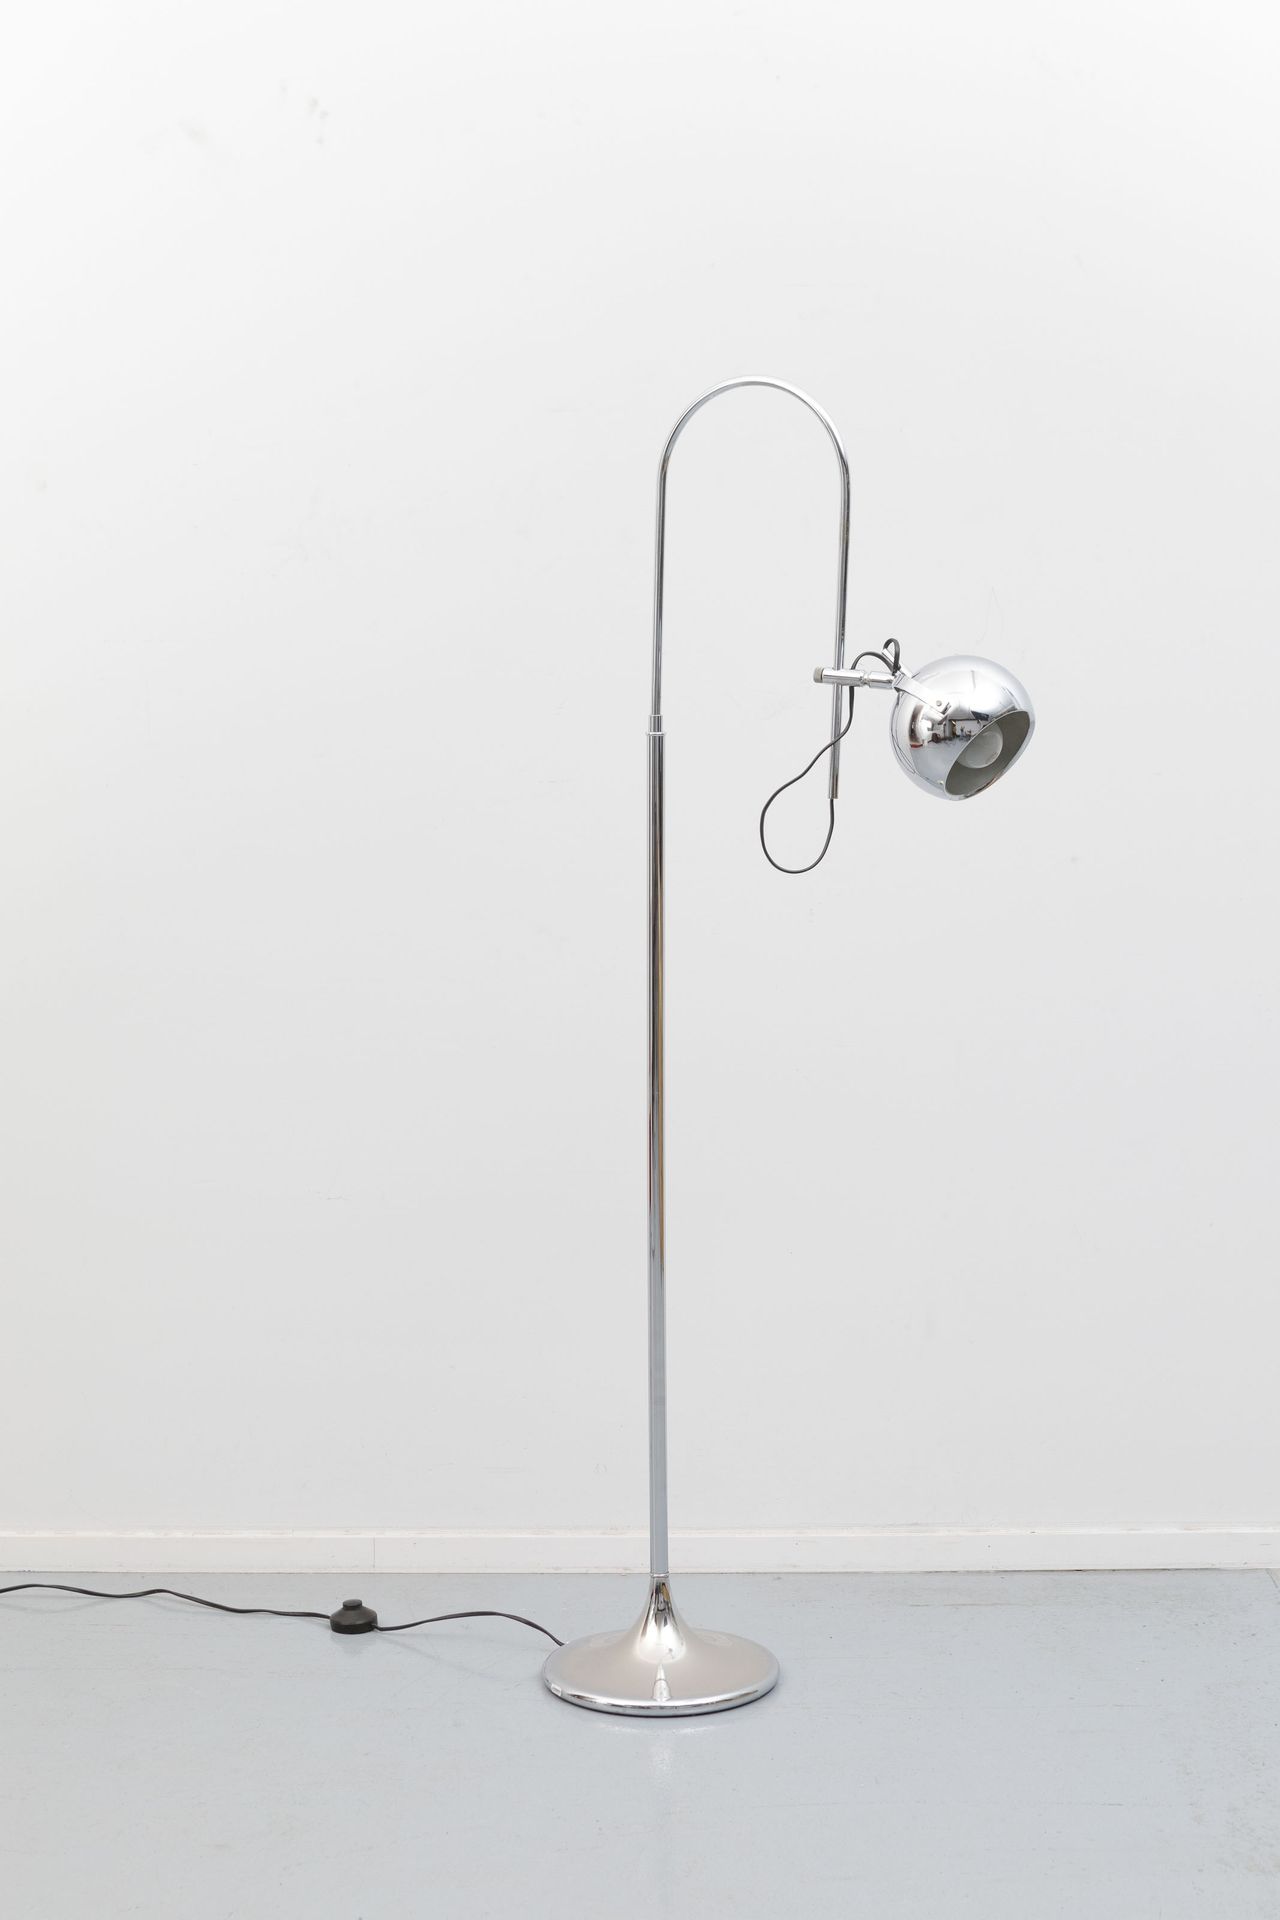 ANONIEM / ANONYME XX Floor lamp. 1970s. Steel chromed structure. Tulip base with&hellip;